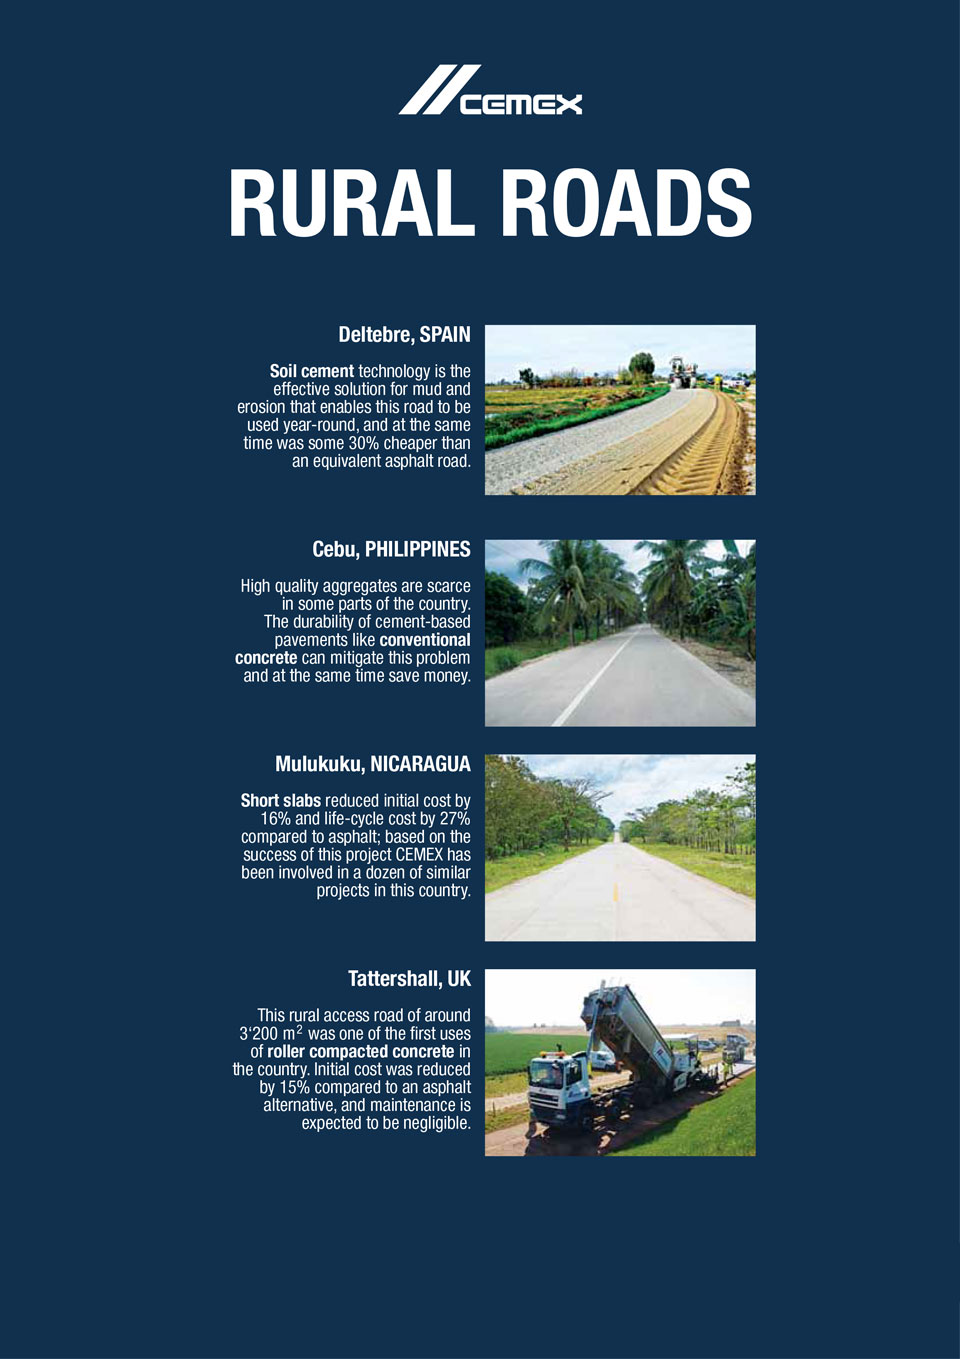 the image shows several rural roads CEMEX has helped with the construction of